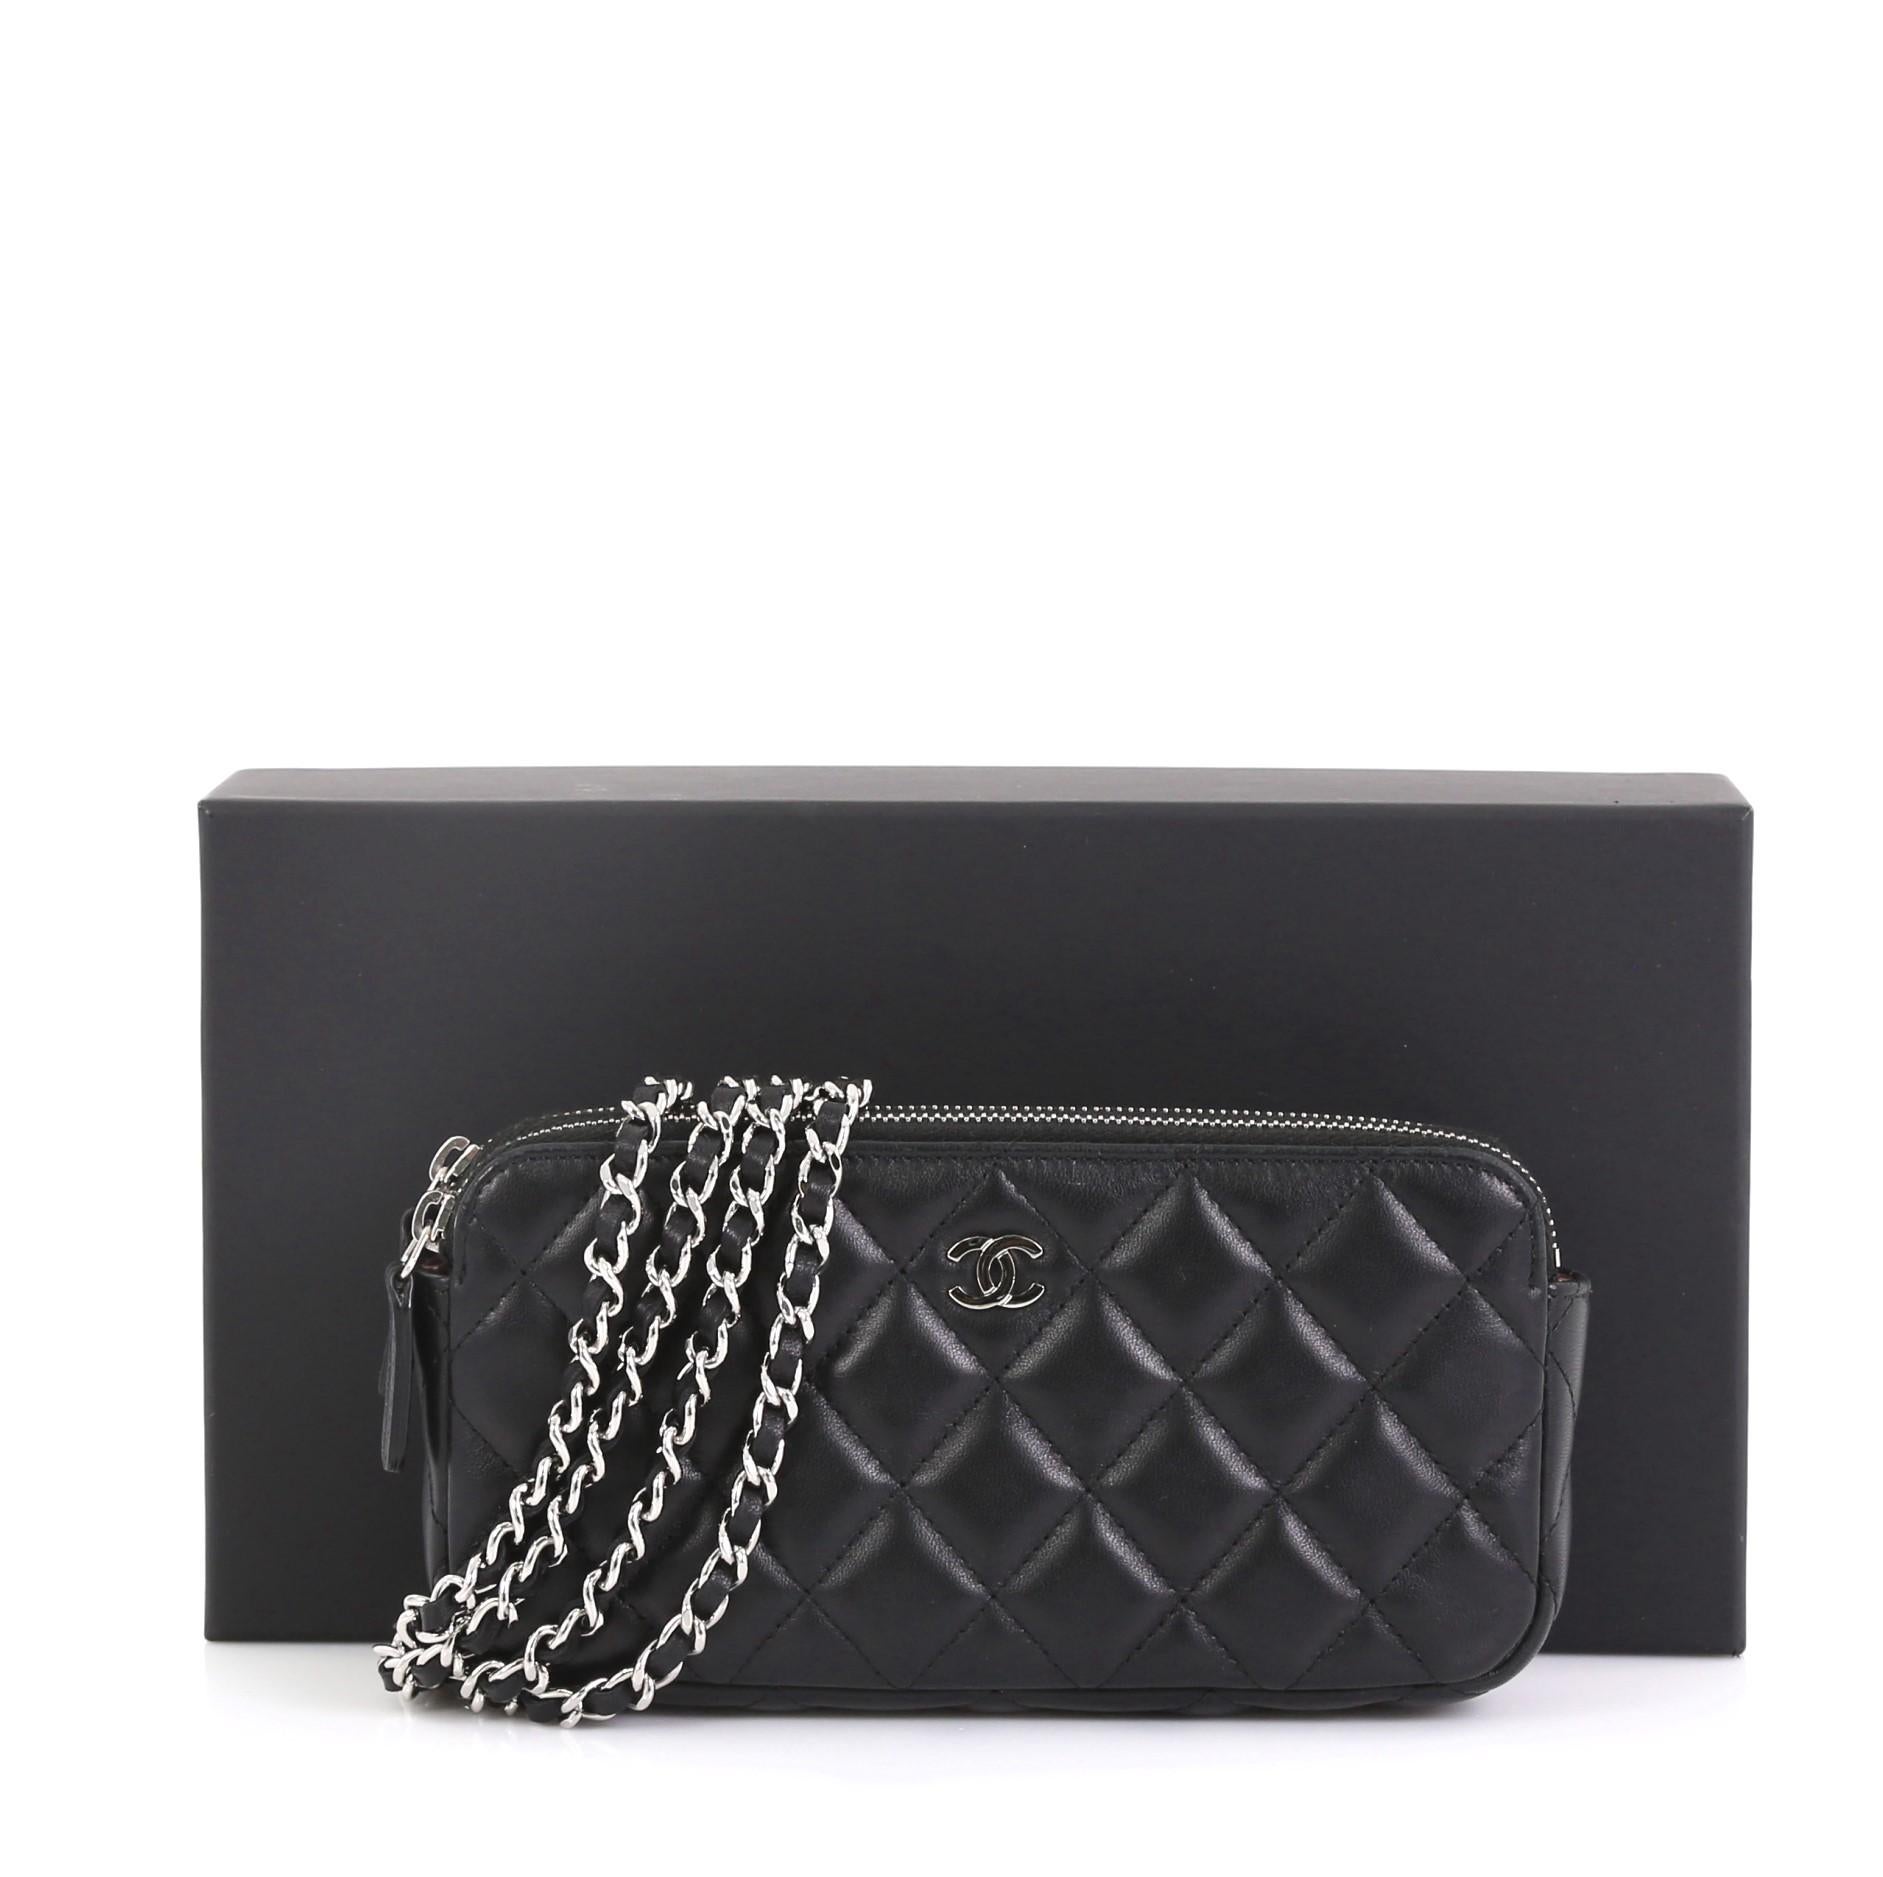 This Chanel Double Zip Clutch with Chain Quilted Lambskin, crafted in black quilted lambskin leather, features a detachable woven-in leather chain strap, front CC logo and silver-tone hardware. Its double zip closures and an open center compartment